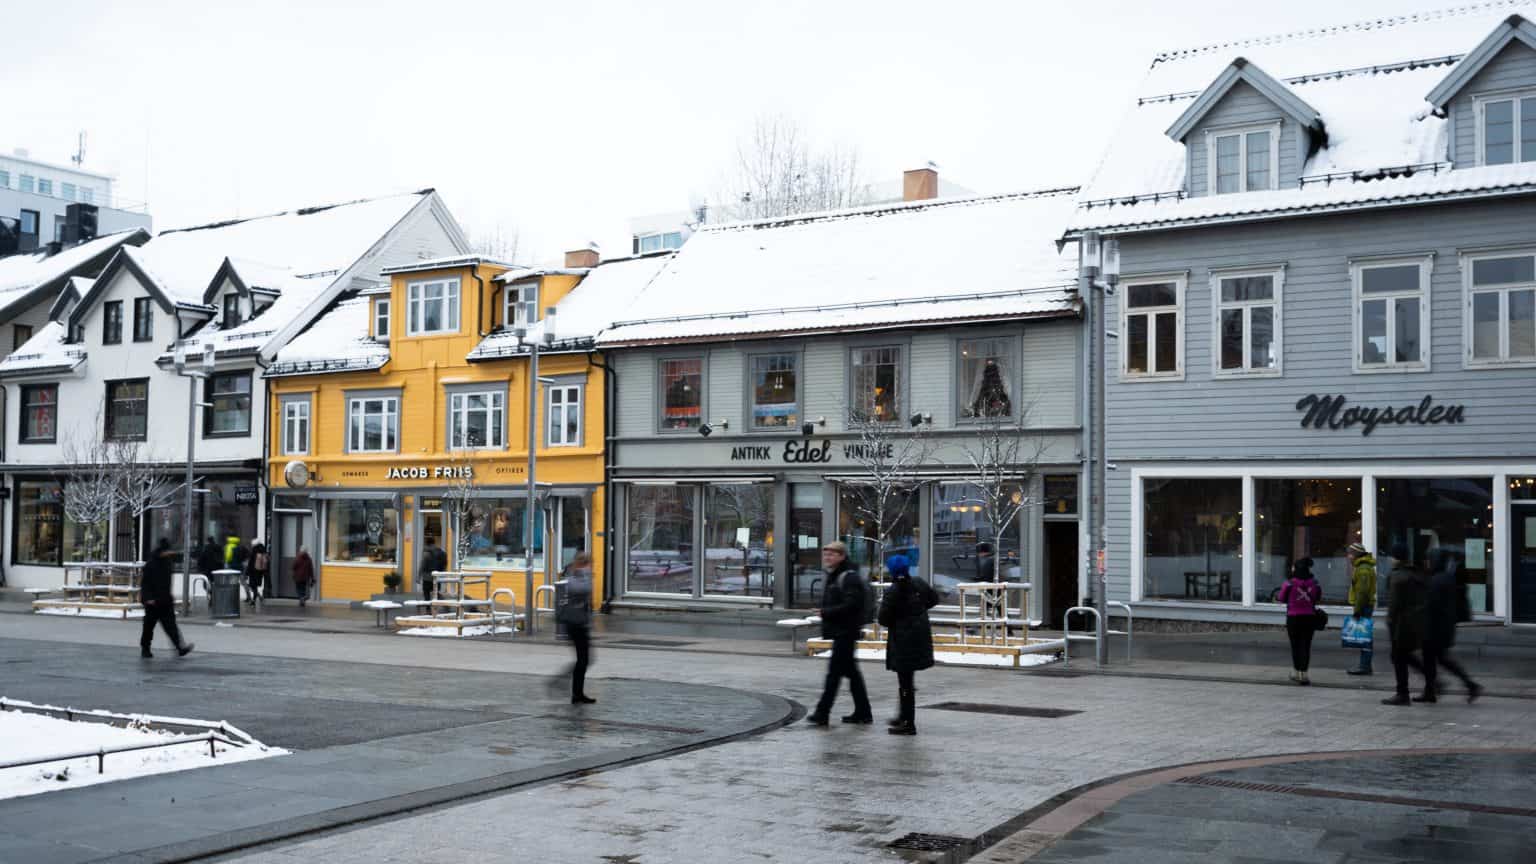 Wooden colourful shops on tromsø high street during a cloudy wet day. People walking past.